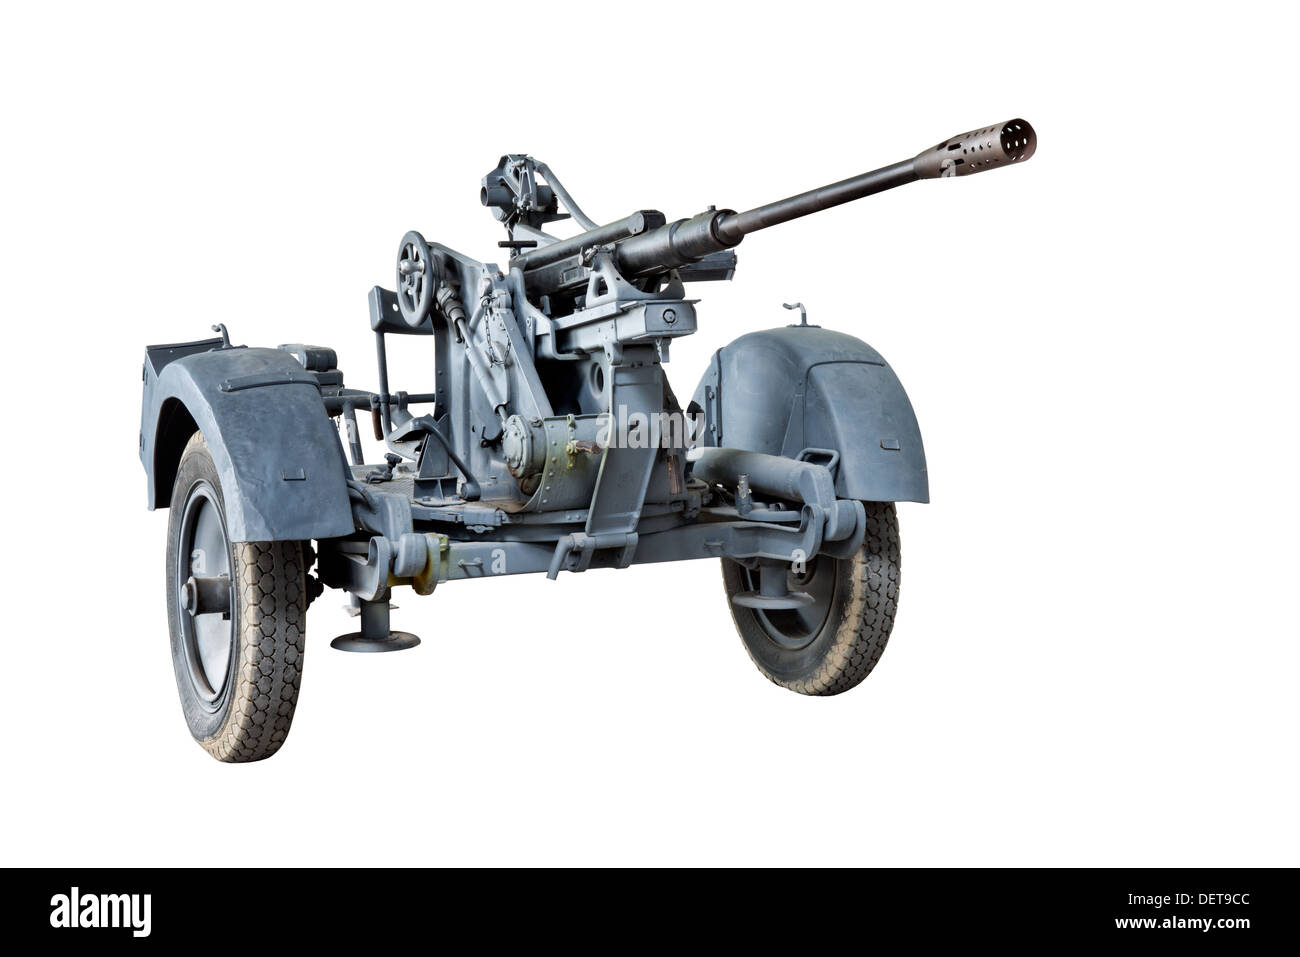 A cut out of a Flak 30, 20mm anti aircraft gun used extensively by Nazi German forces during WW2 Stock Photo